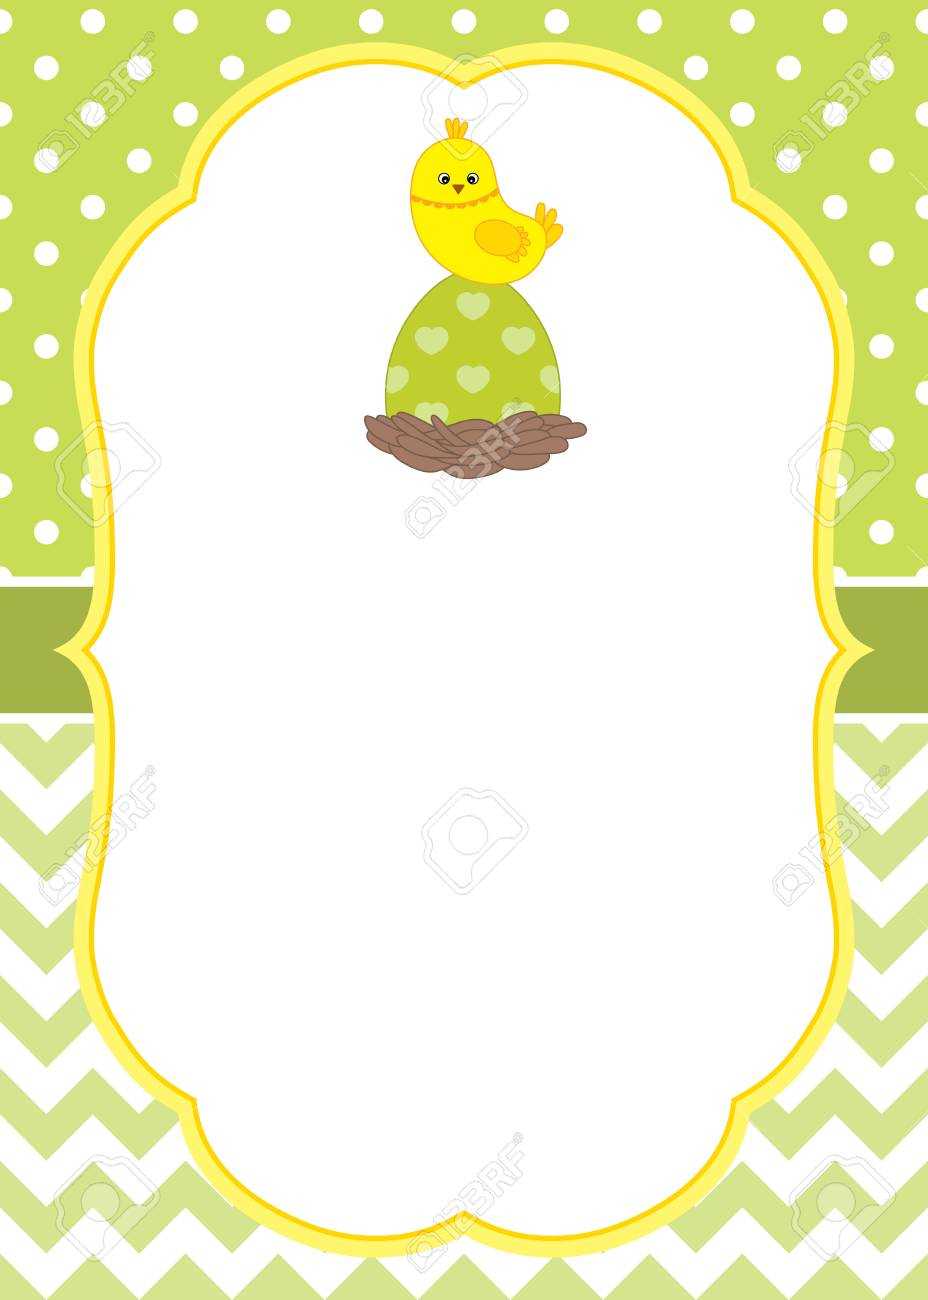 Vector Card Template With A Cute Chick On Polka Dot And Chevron.. With Easter Chick Card Template